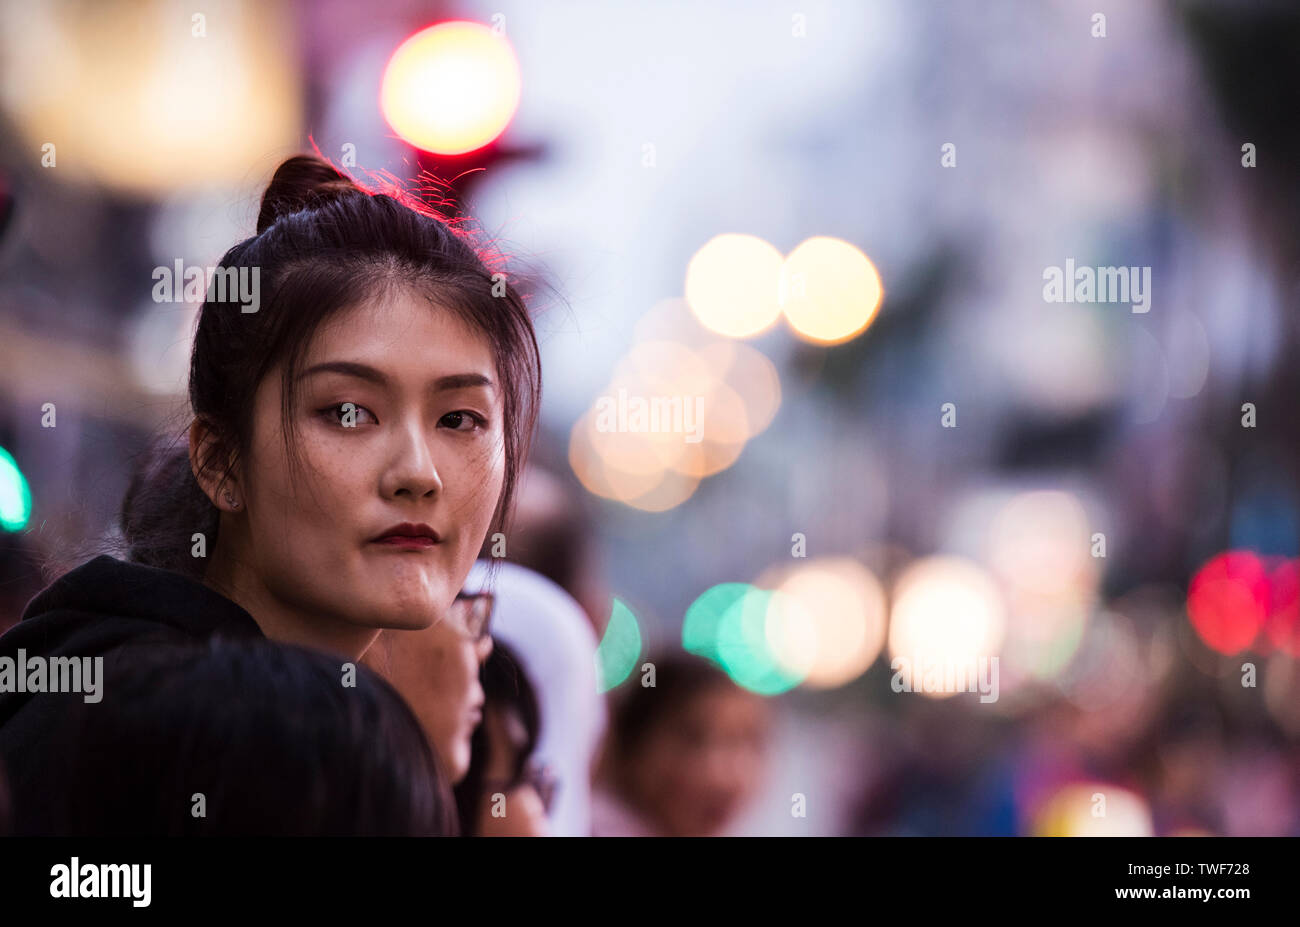 Portrait of woman looking directly at camera during Chinese New Year celebrations in Kowloon Hong Kong. Stock Photo